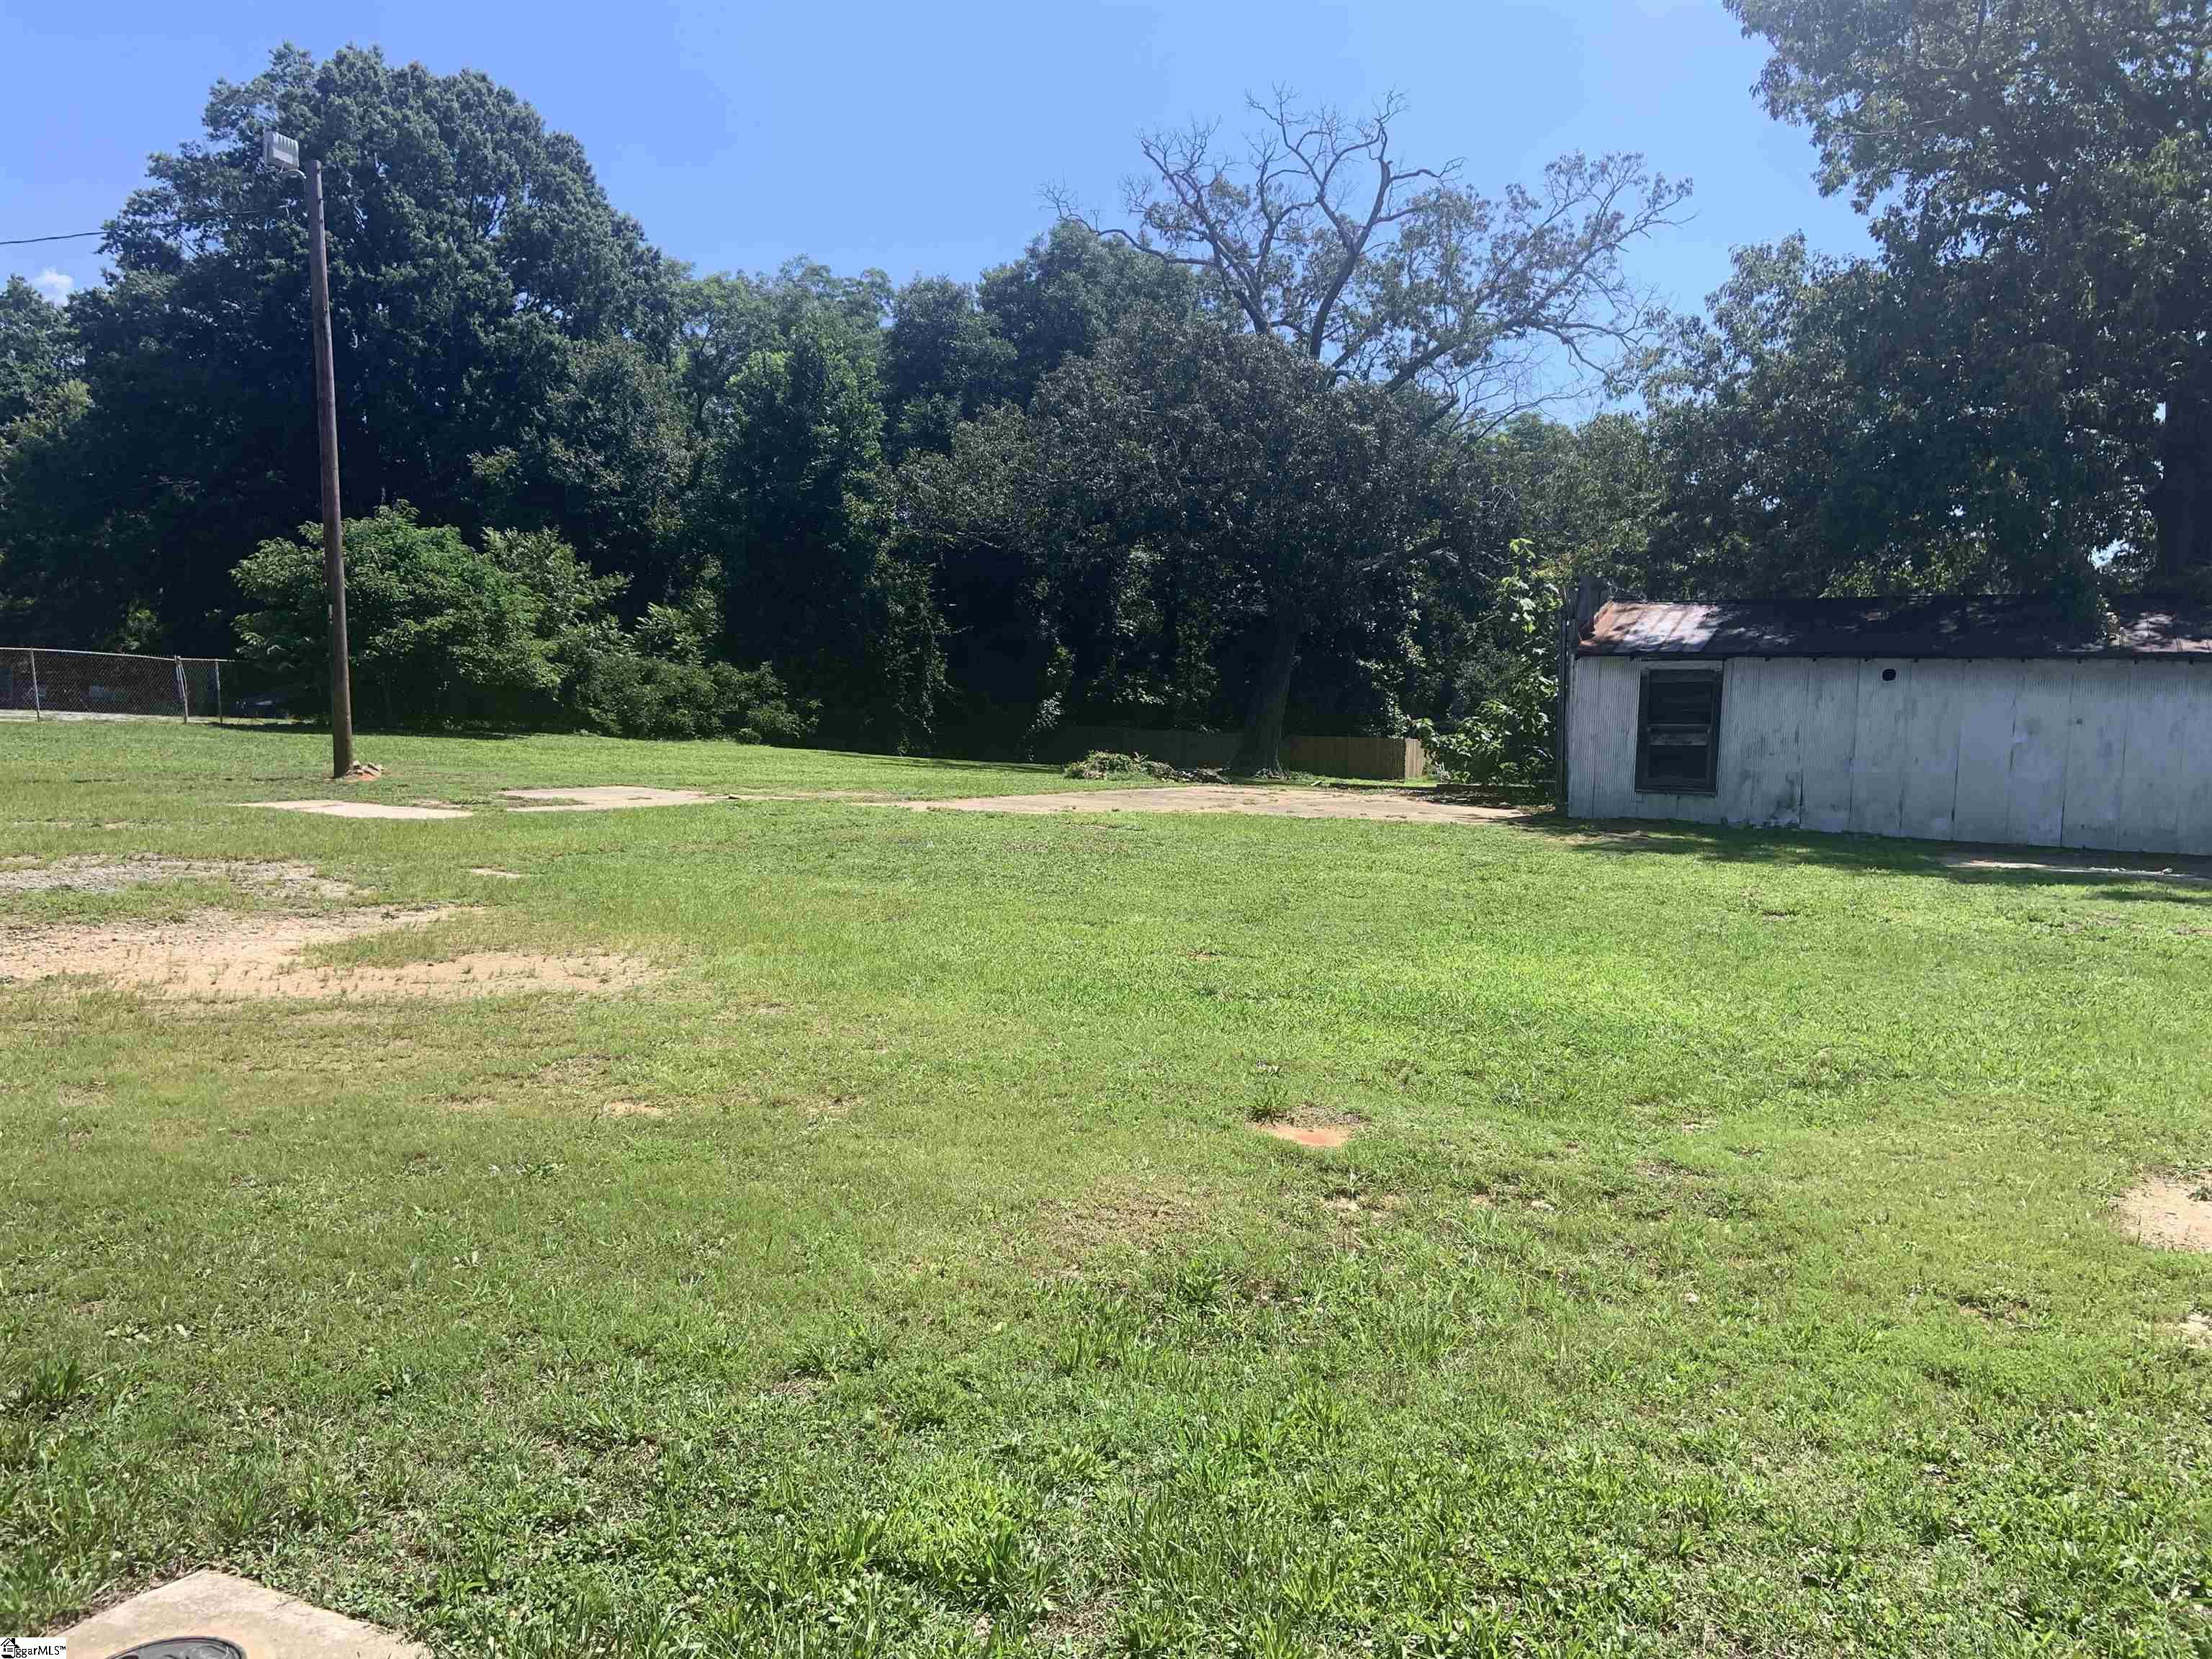 PLEASE BE ADVISED LOT A B & C WERE ALSO SOLD. Come see this property located on Main St. and the corner of Tollison Street in Belton! Great commercial potential!  Property includes TMS #s 249-02-08-009-000 249-02-08-008-000